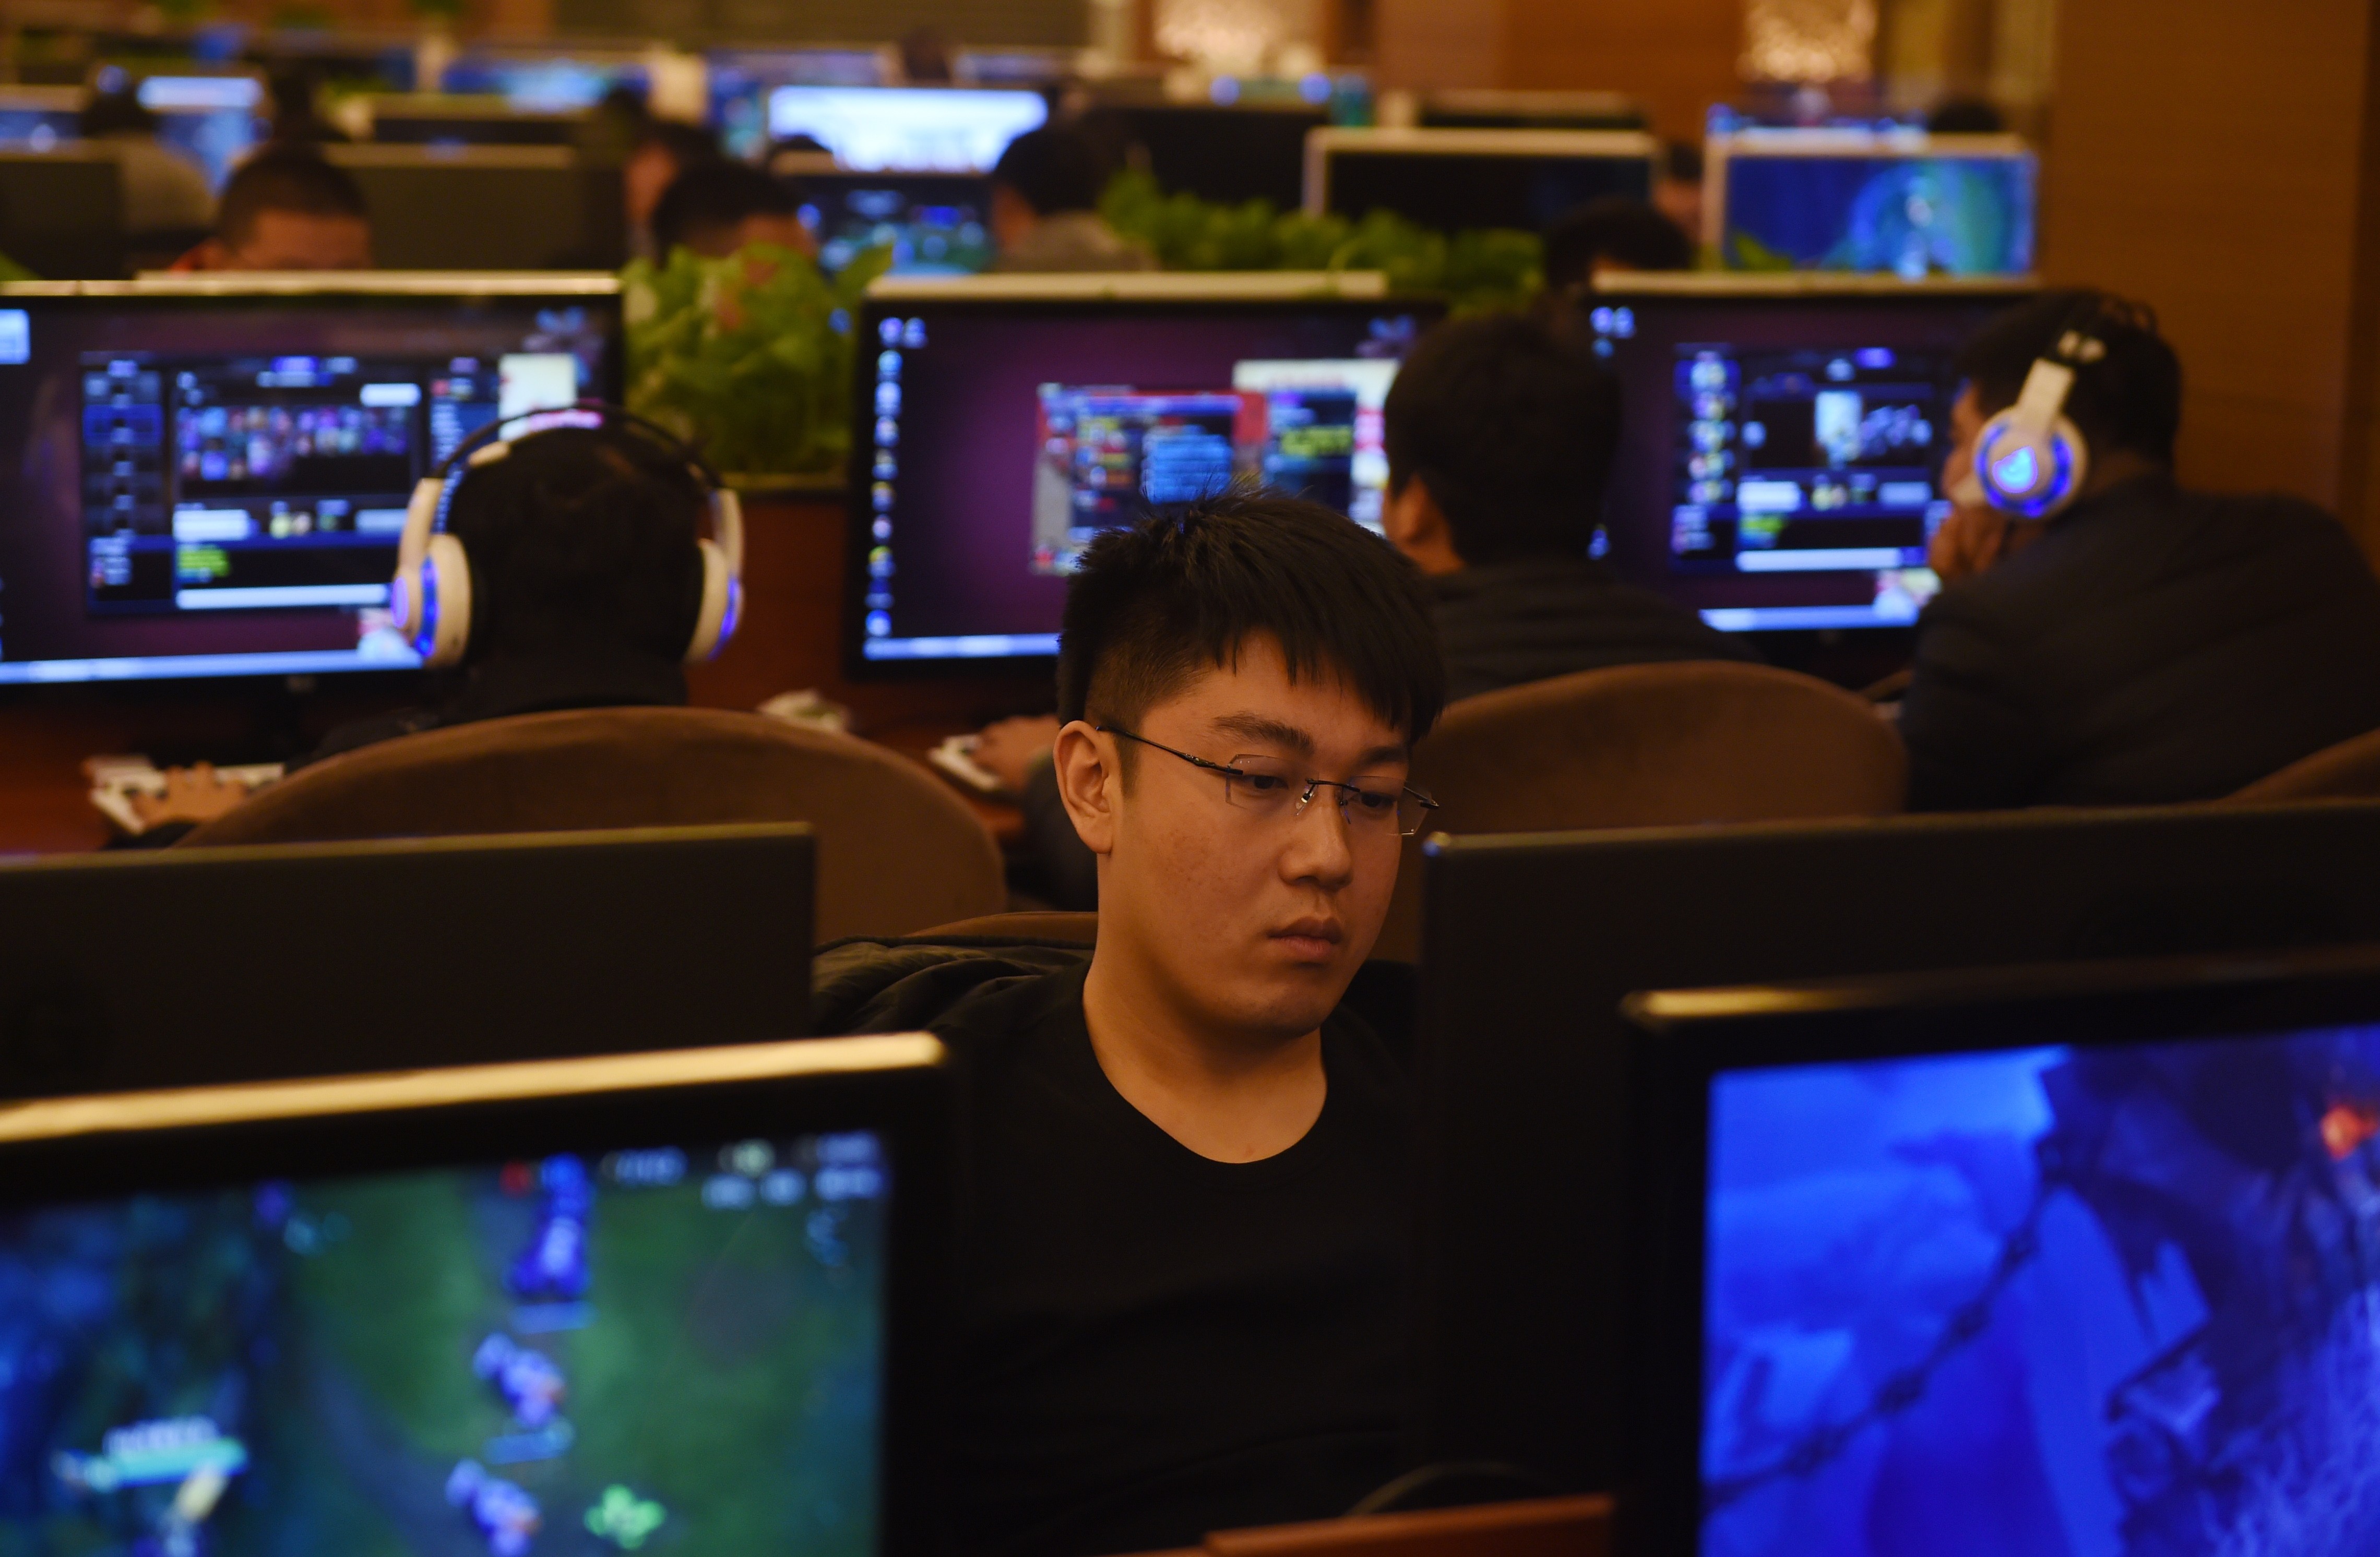 Gamers play on computers in an internet bar in Beijing. China’s increasingly wired population has made the Netflix series Love, Death & Robots a hit there, even though Netflix is not available in China. Photo: AFP